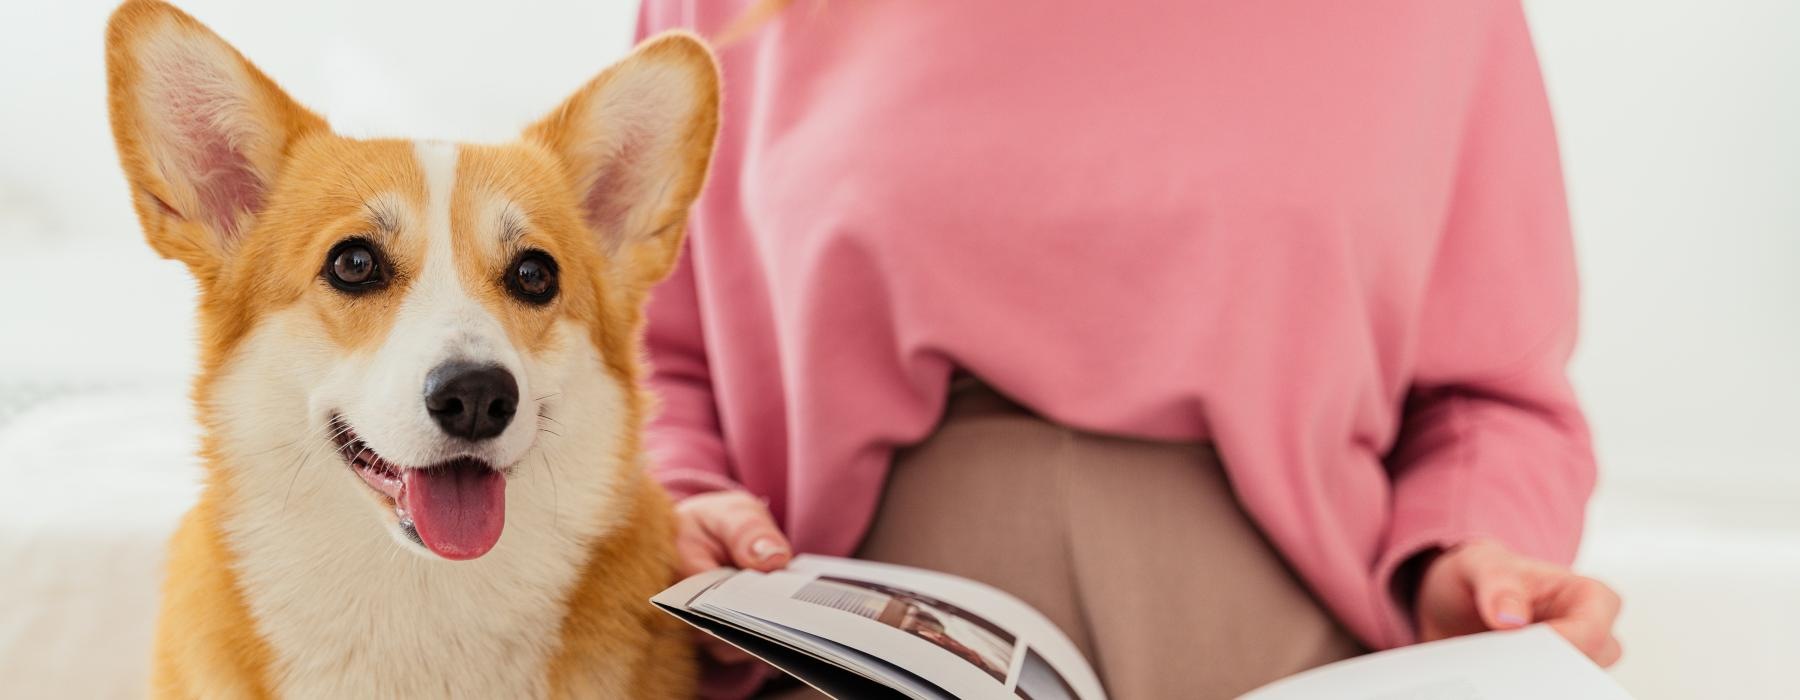 a dog sitting next to a woman who is reading a book